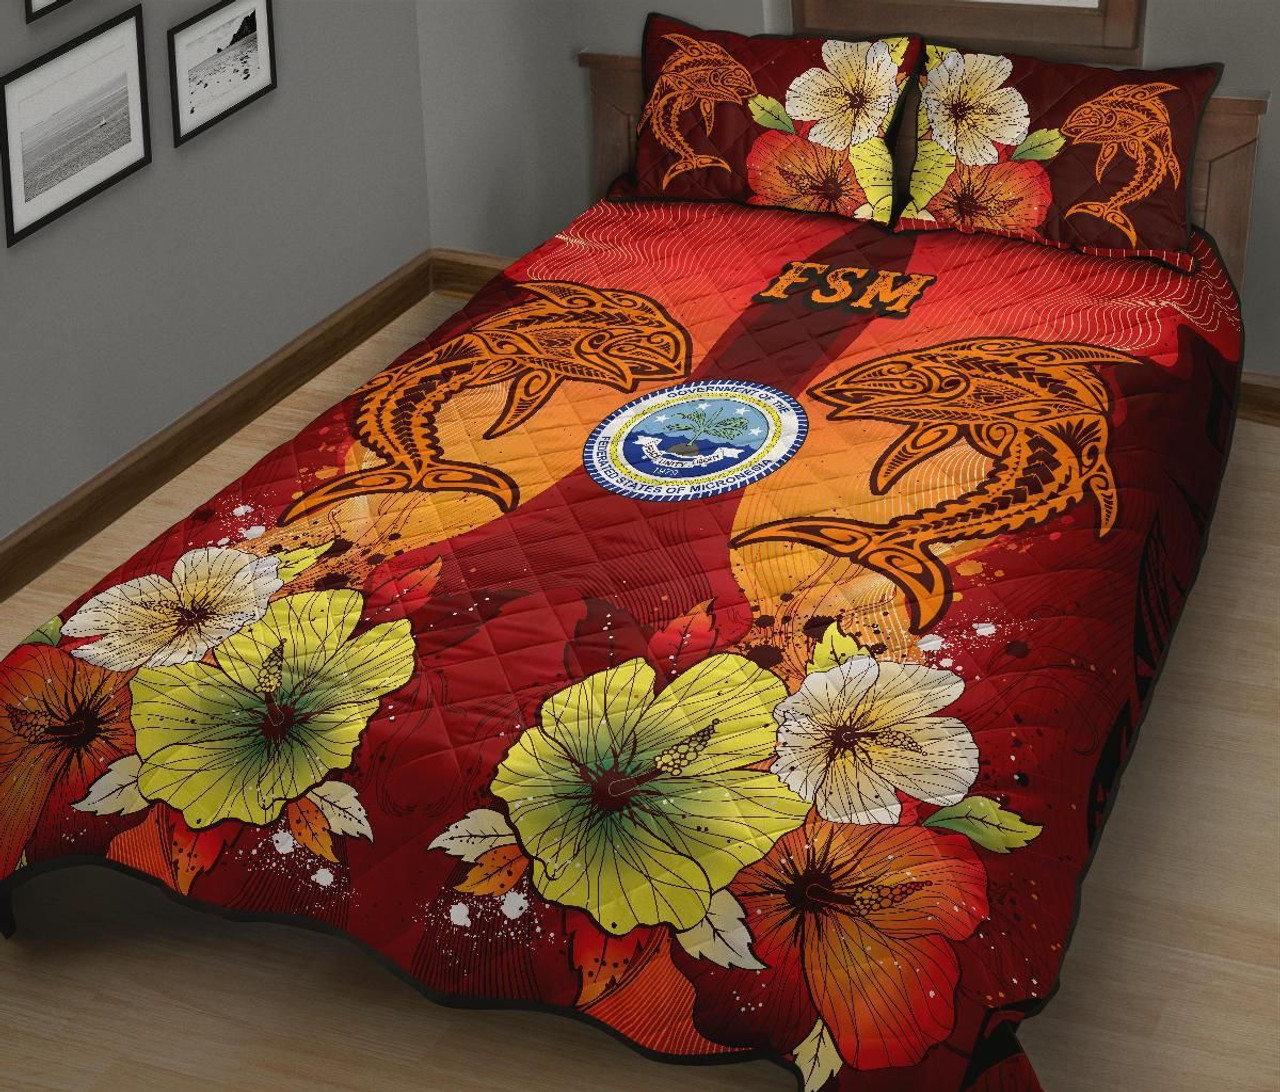 Federated States Of Micronesia Quilt Bed Sets - Tribal Tuna Fish 4